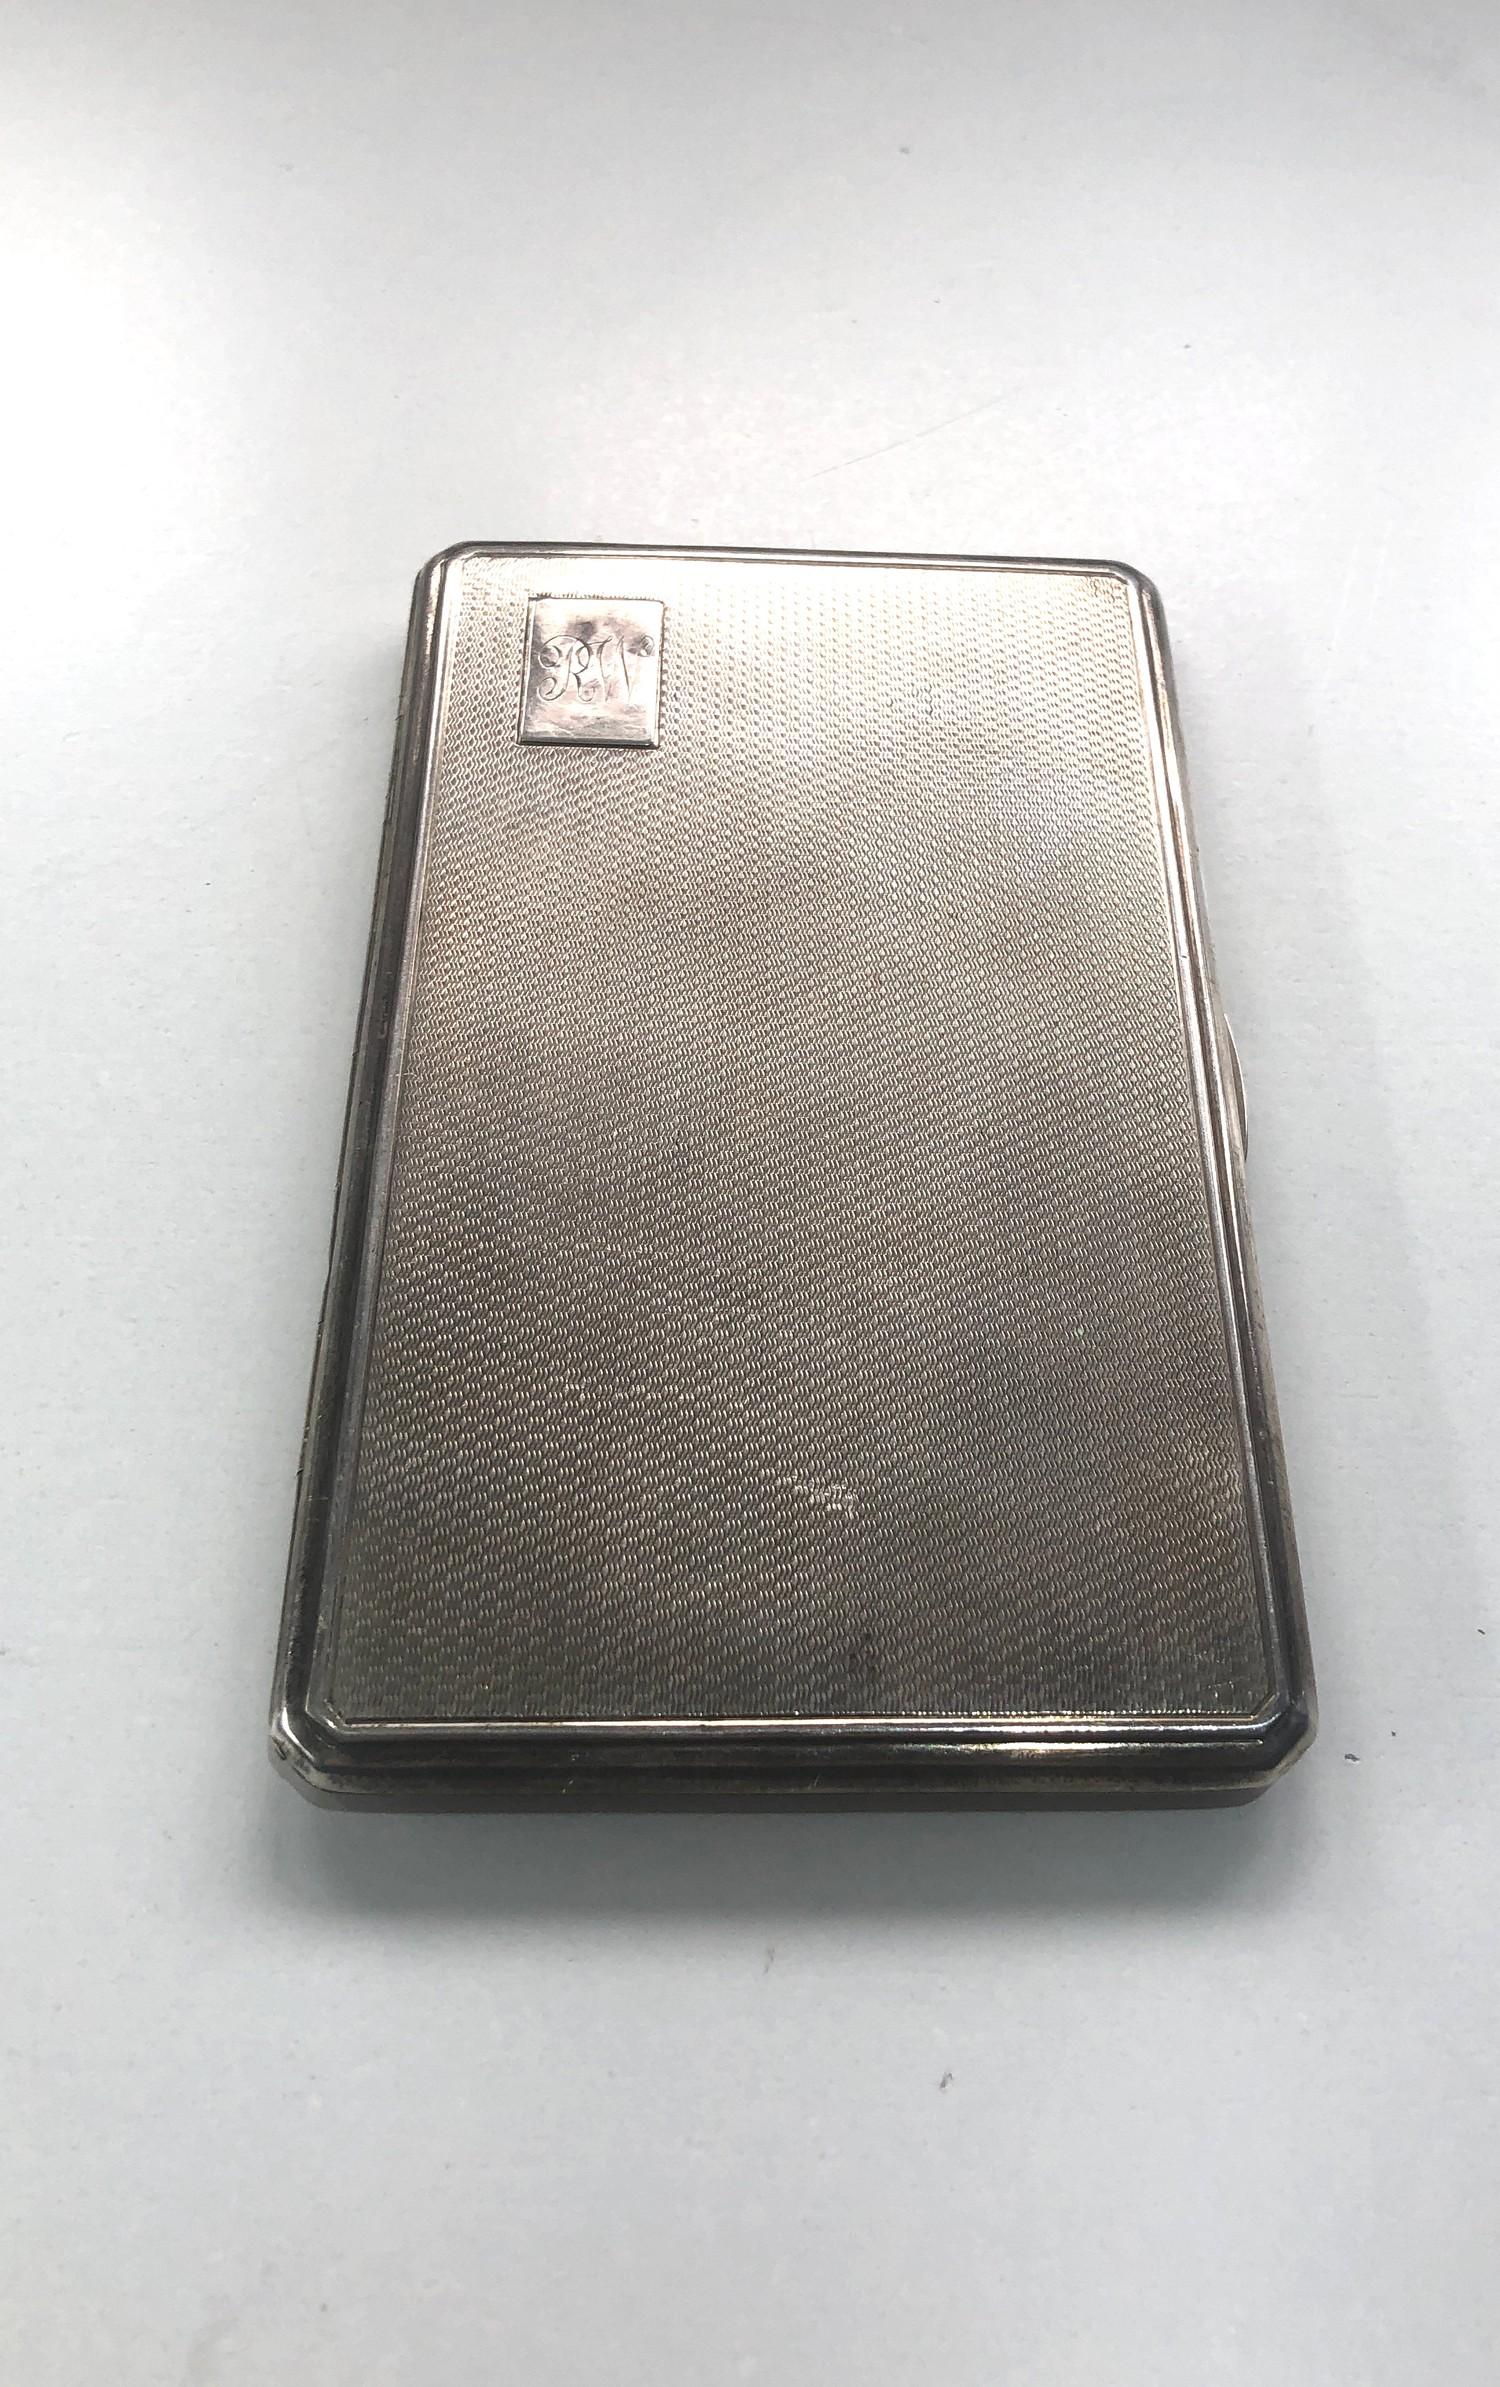 Large heavy silver engine turned cigarette case weight 210g